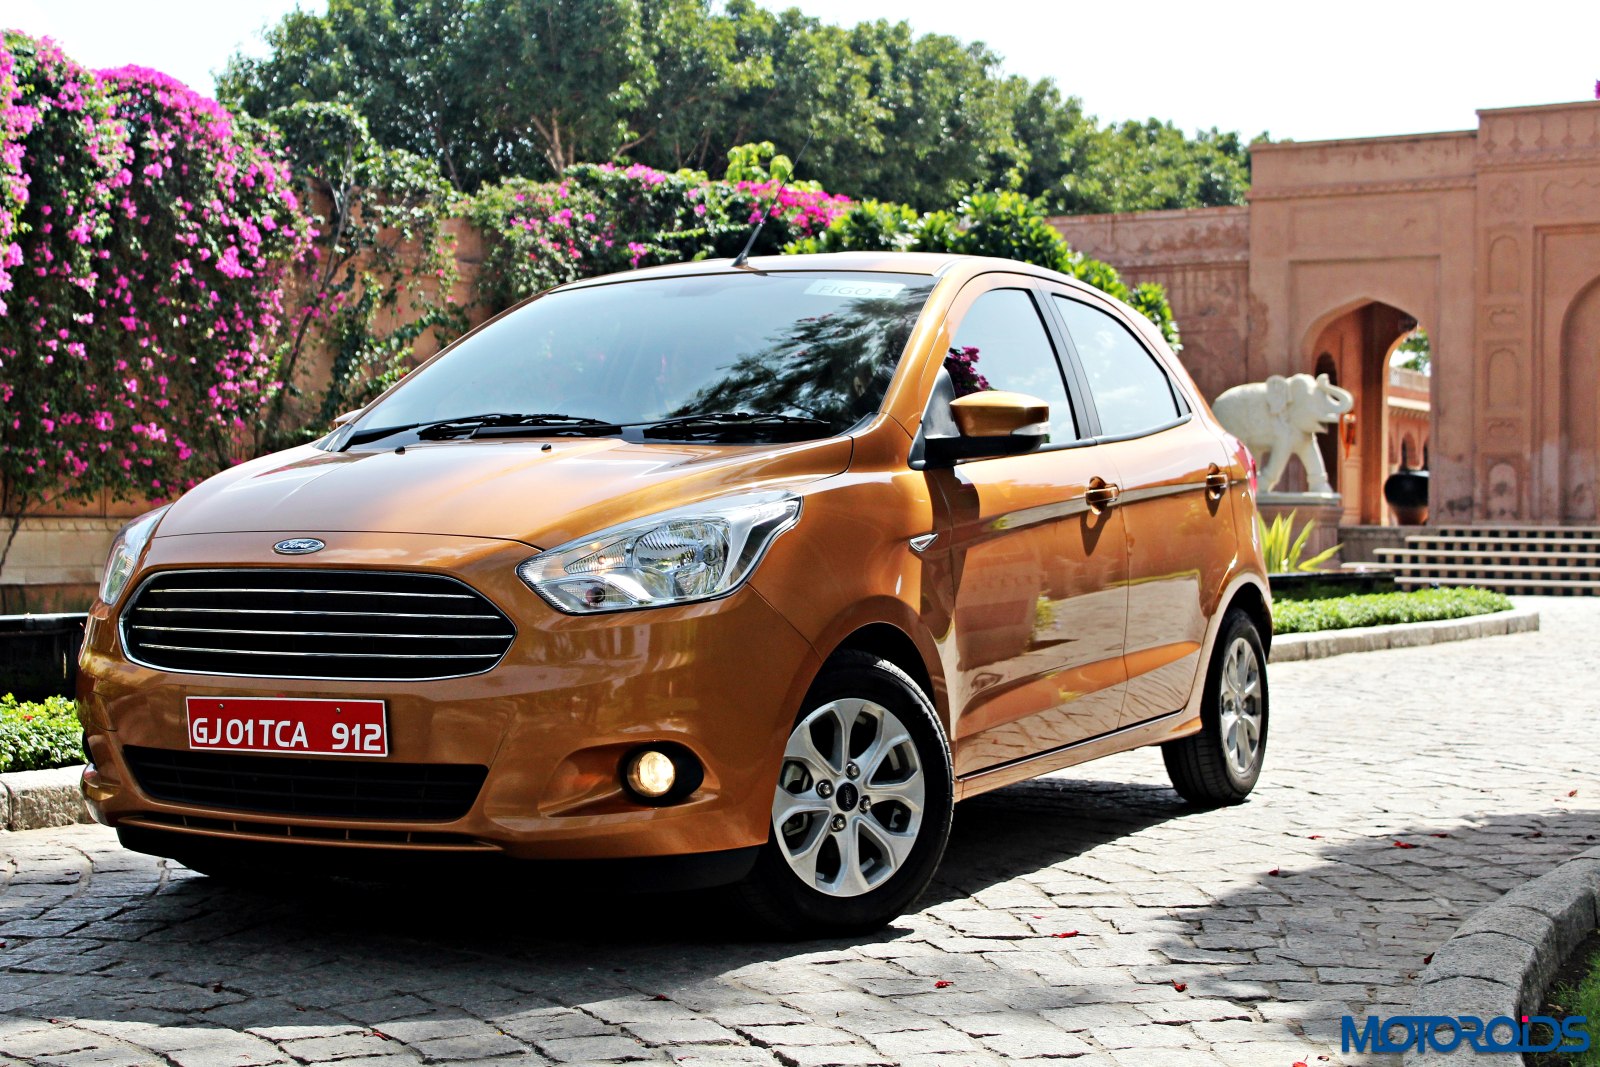 New 2015 Ford Figo 1.5 TDCi / 1.5 Ti-VCT Auto Review : Back with a Bang